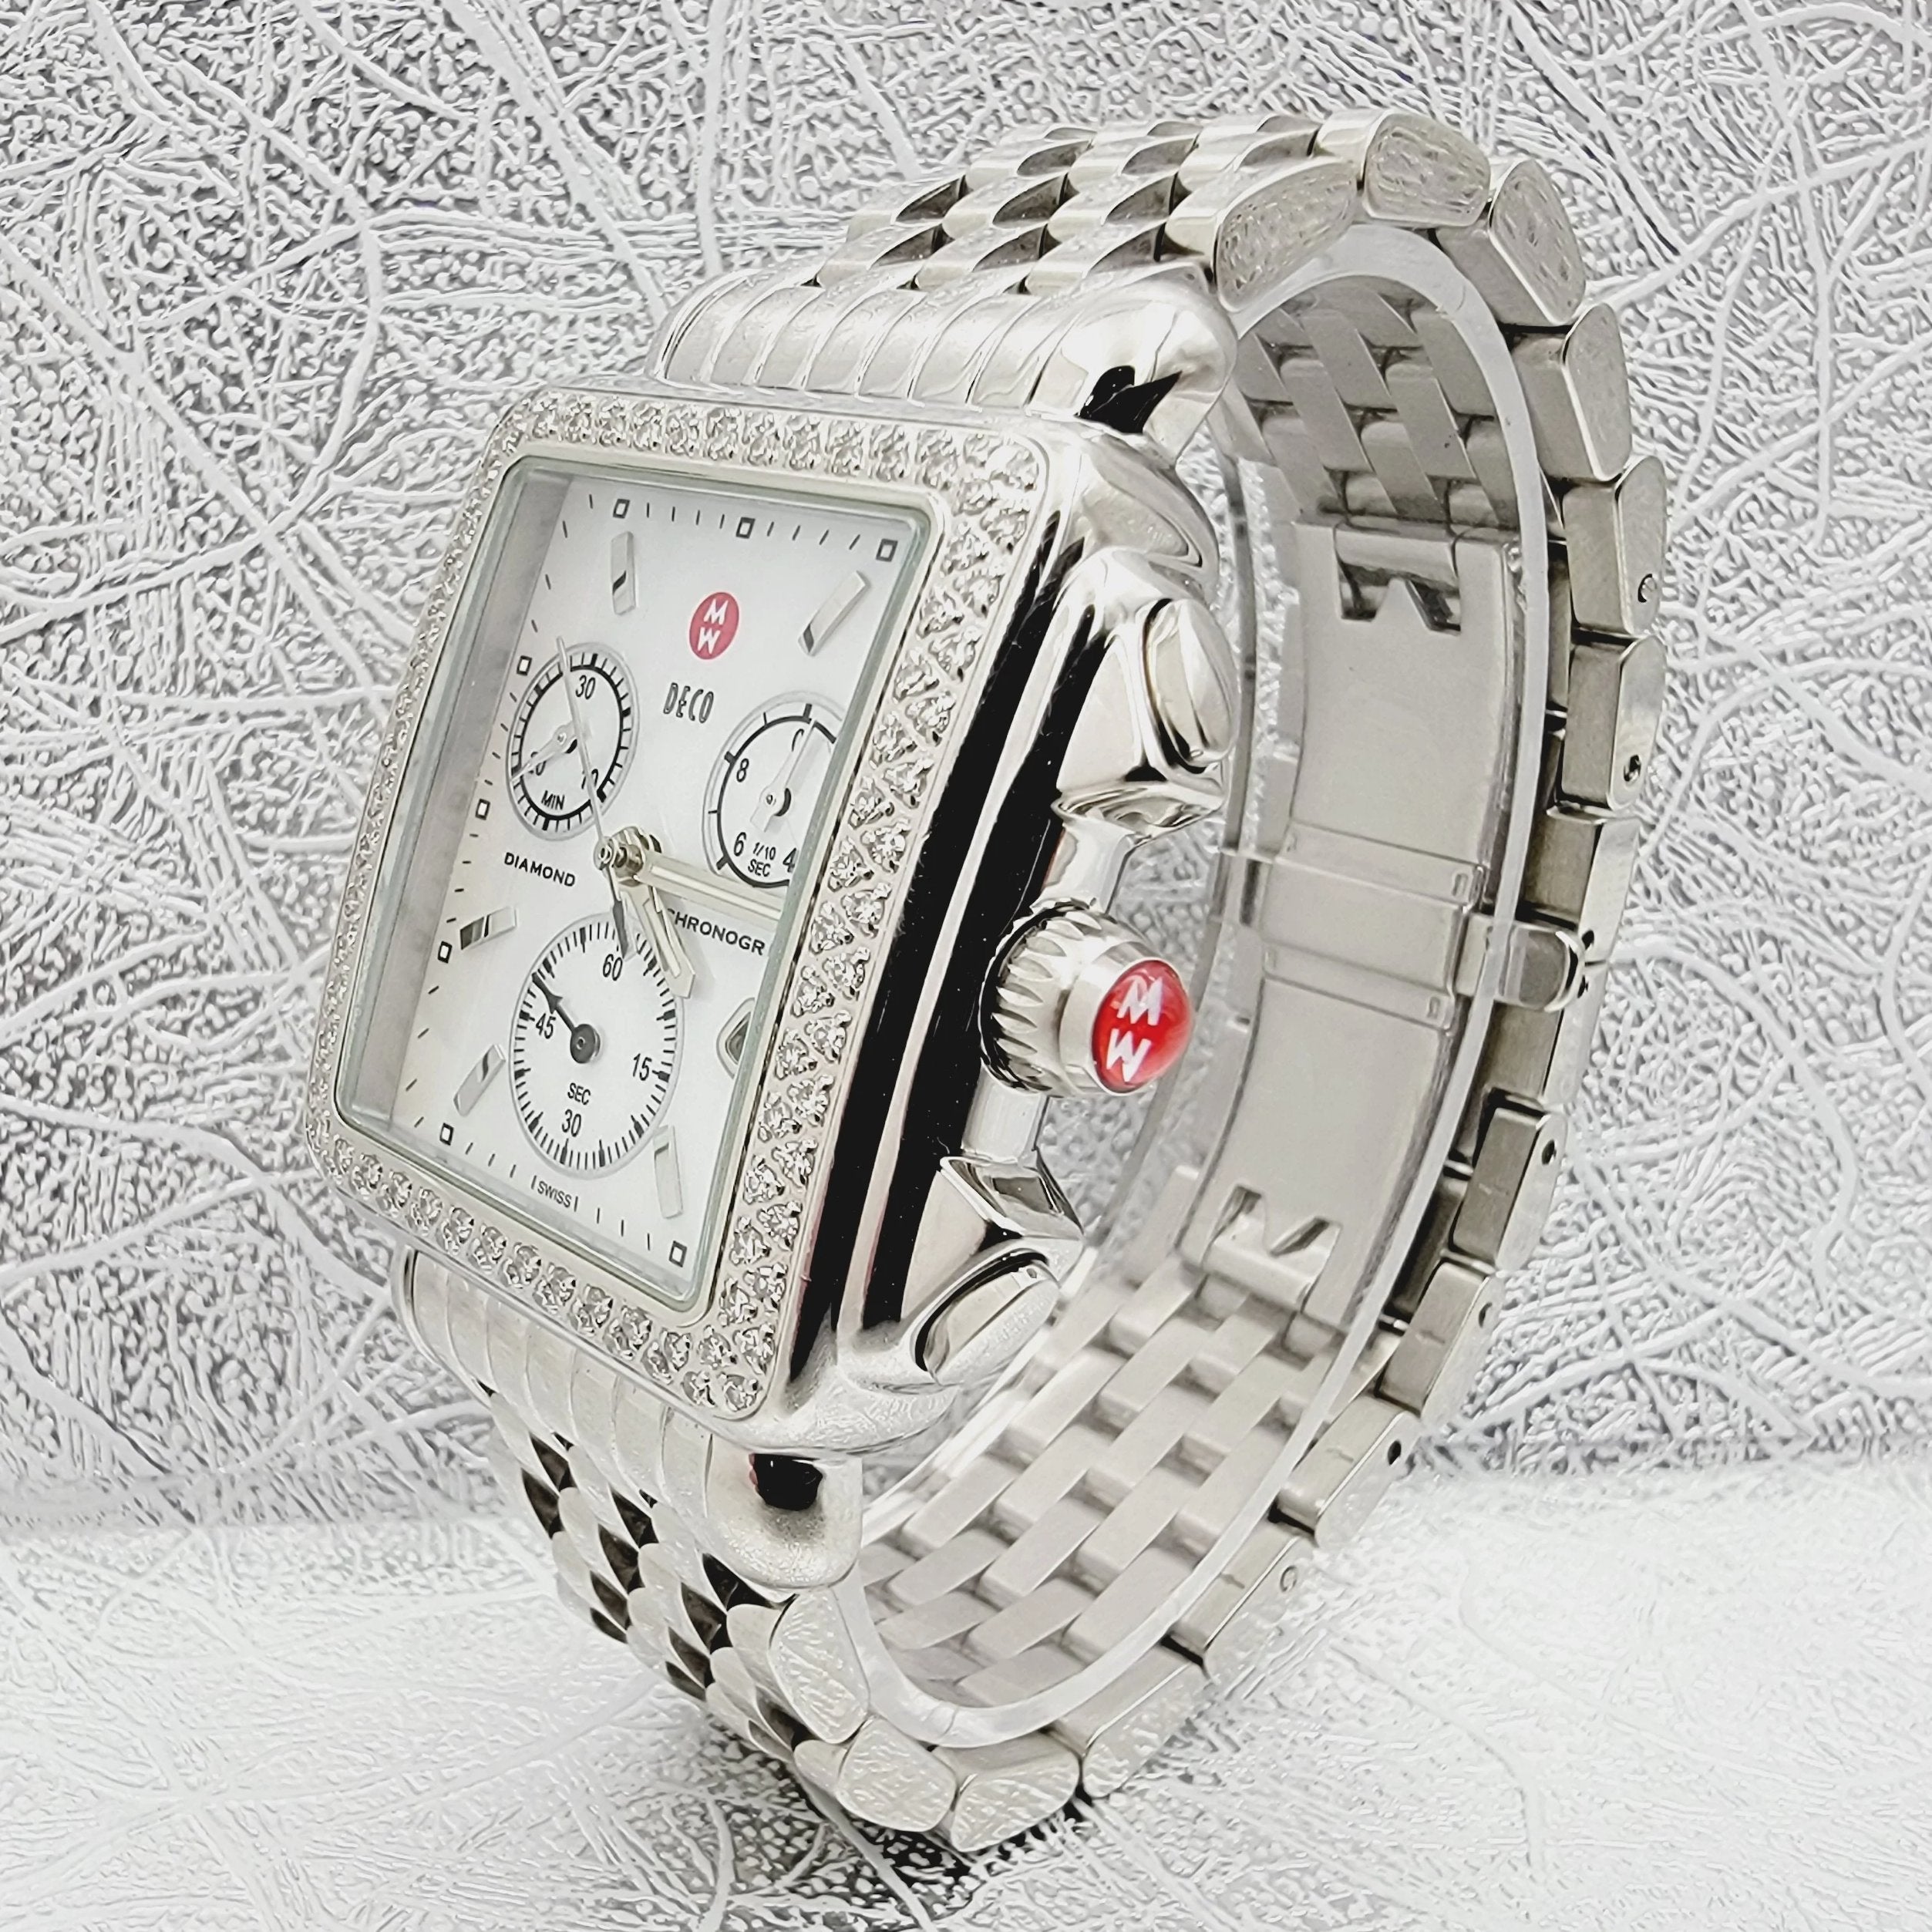 Ladies Michele Deco 33mm Stainless Steel Watch with Mother of Pearl Chronograph Dial and Diamond Bezel. (Pre-Owned 71-6000)